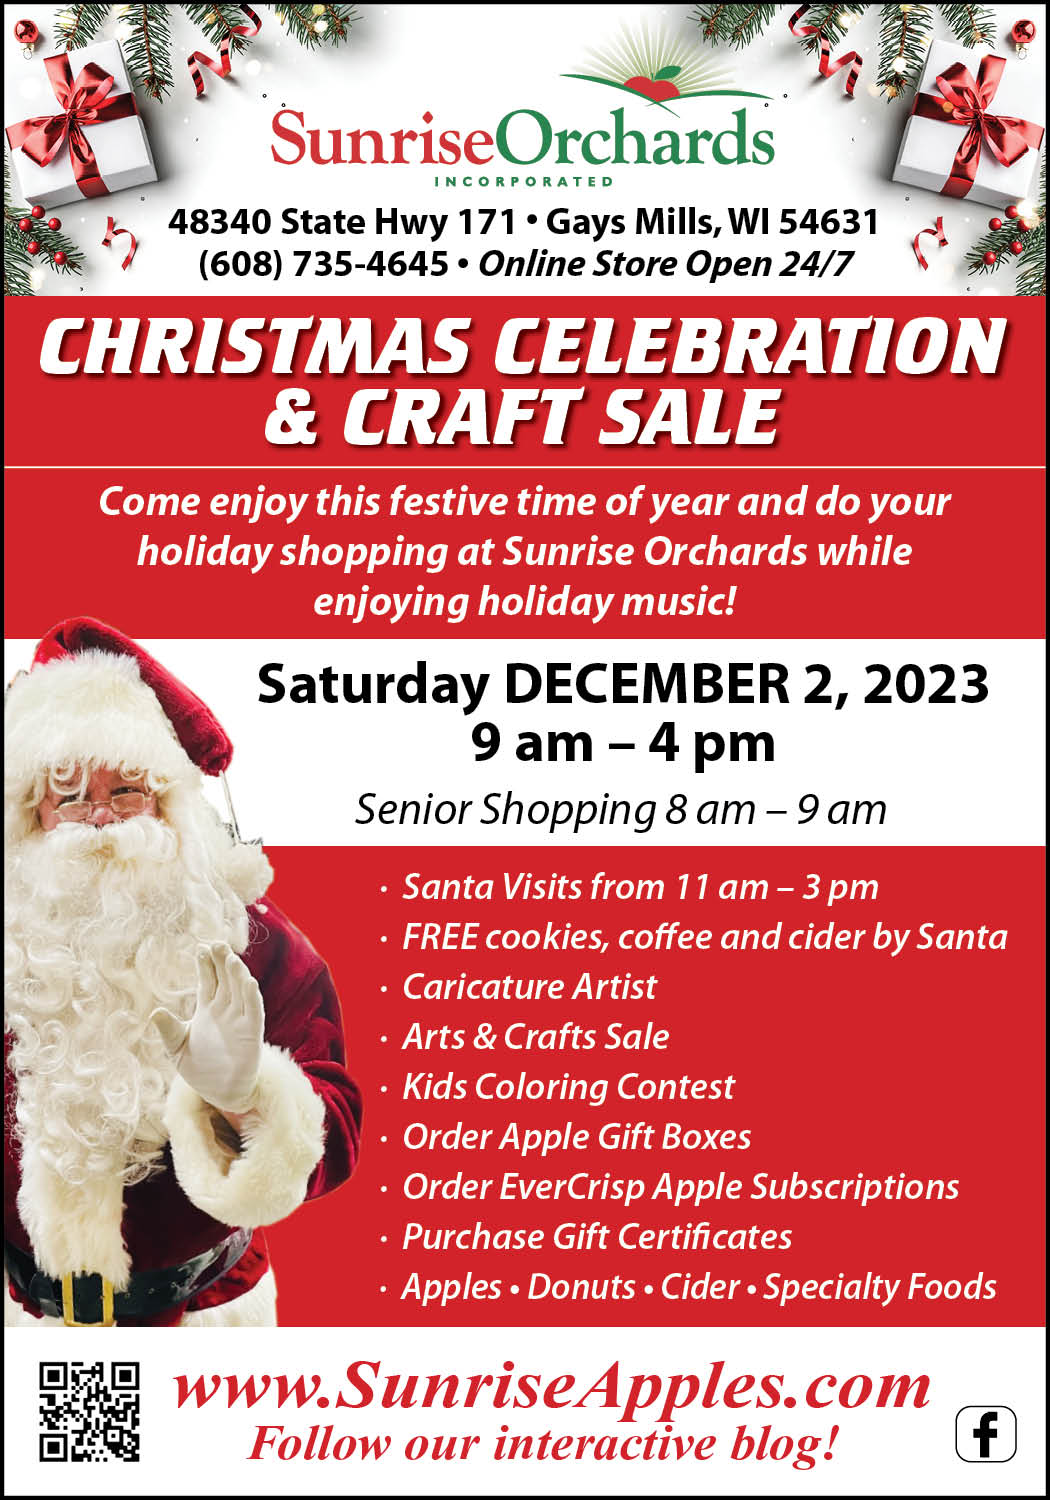 Celebrate Christmas with Santa at Sunrise Orchards Saturday December 2nd!